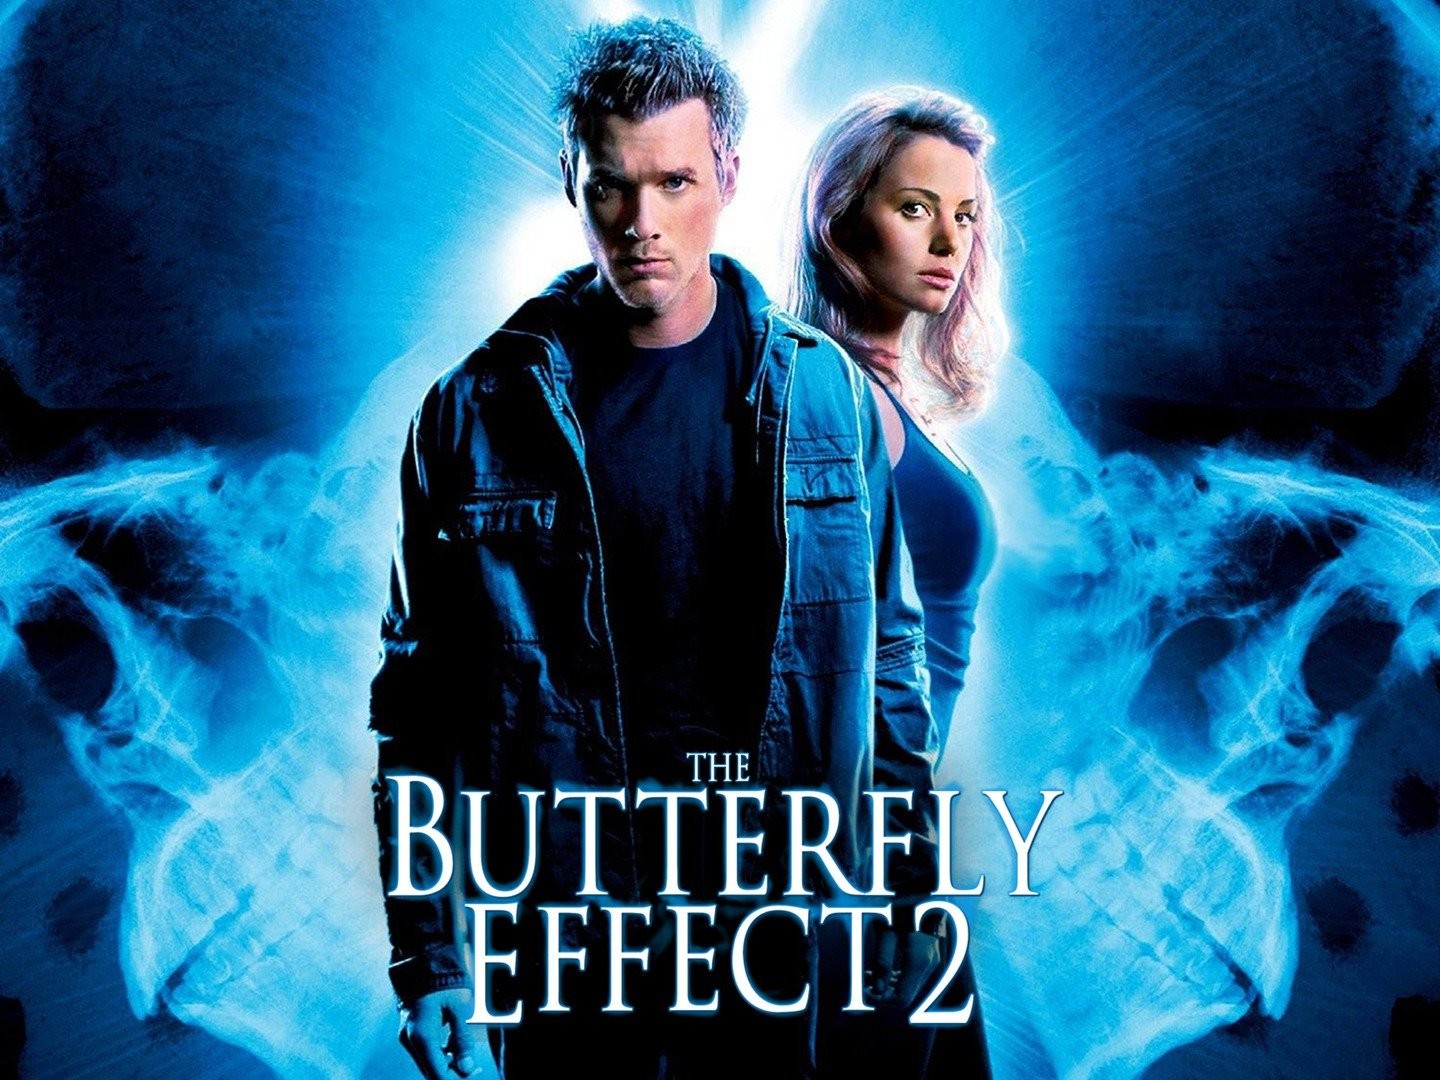 The butterfly effect 2 cast